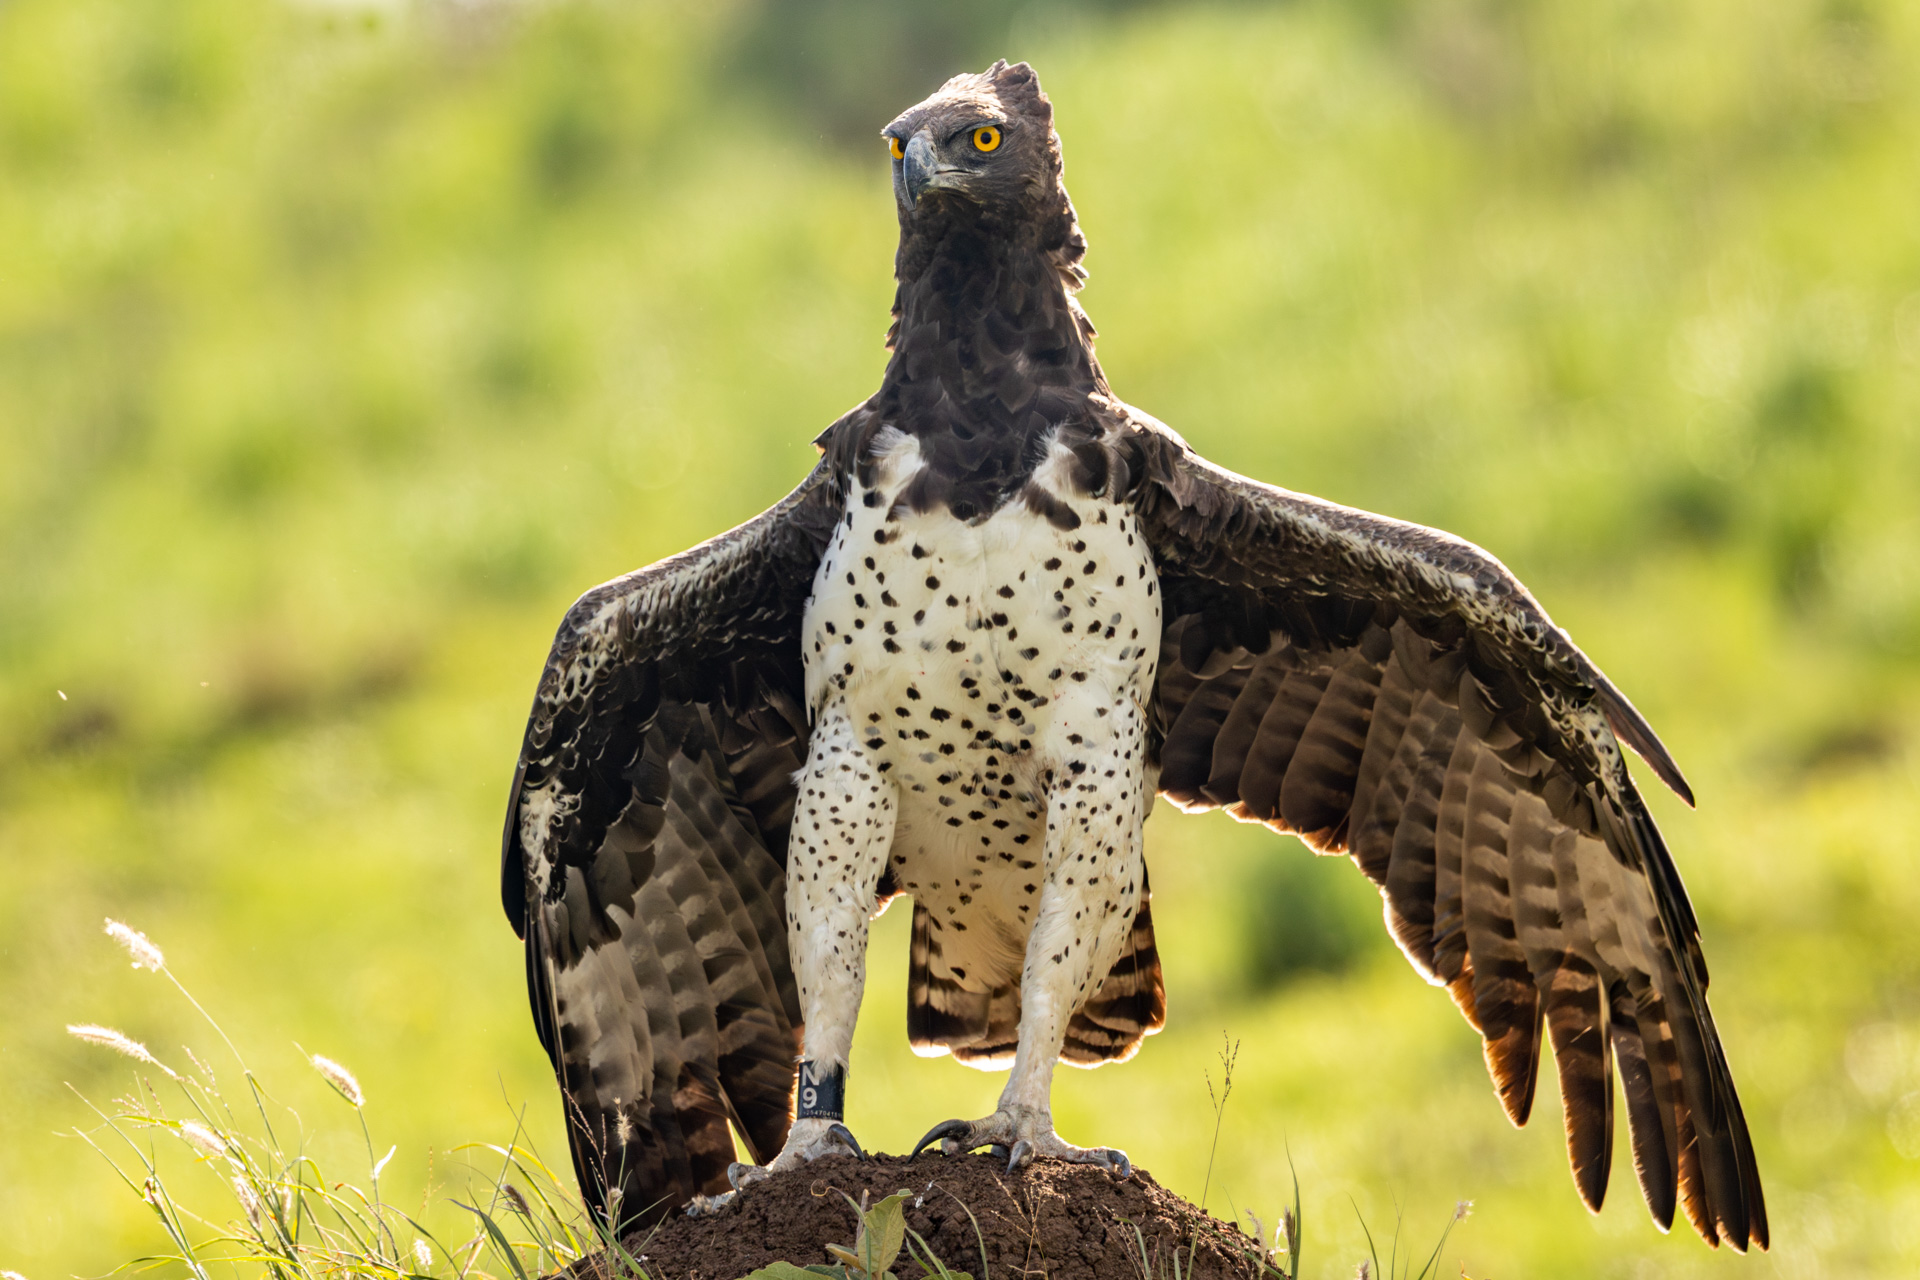 A tagged martial eagle identified as 'N9' — the Inselberg female (estimated to be about 13 years old)